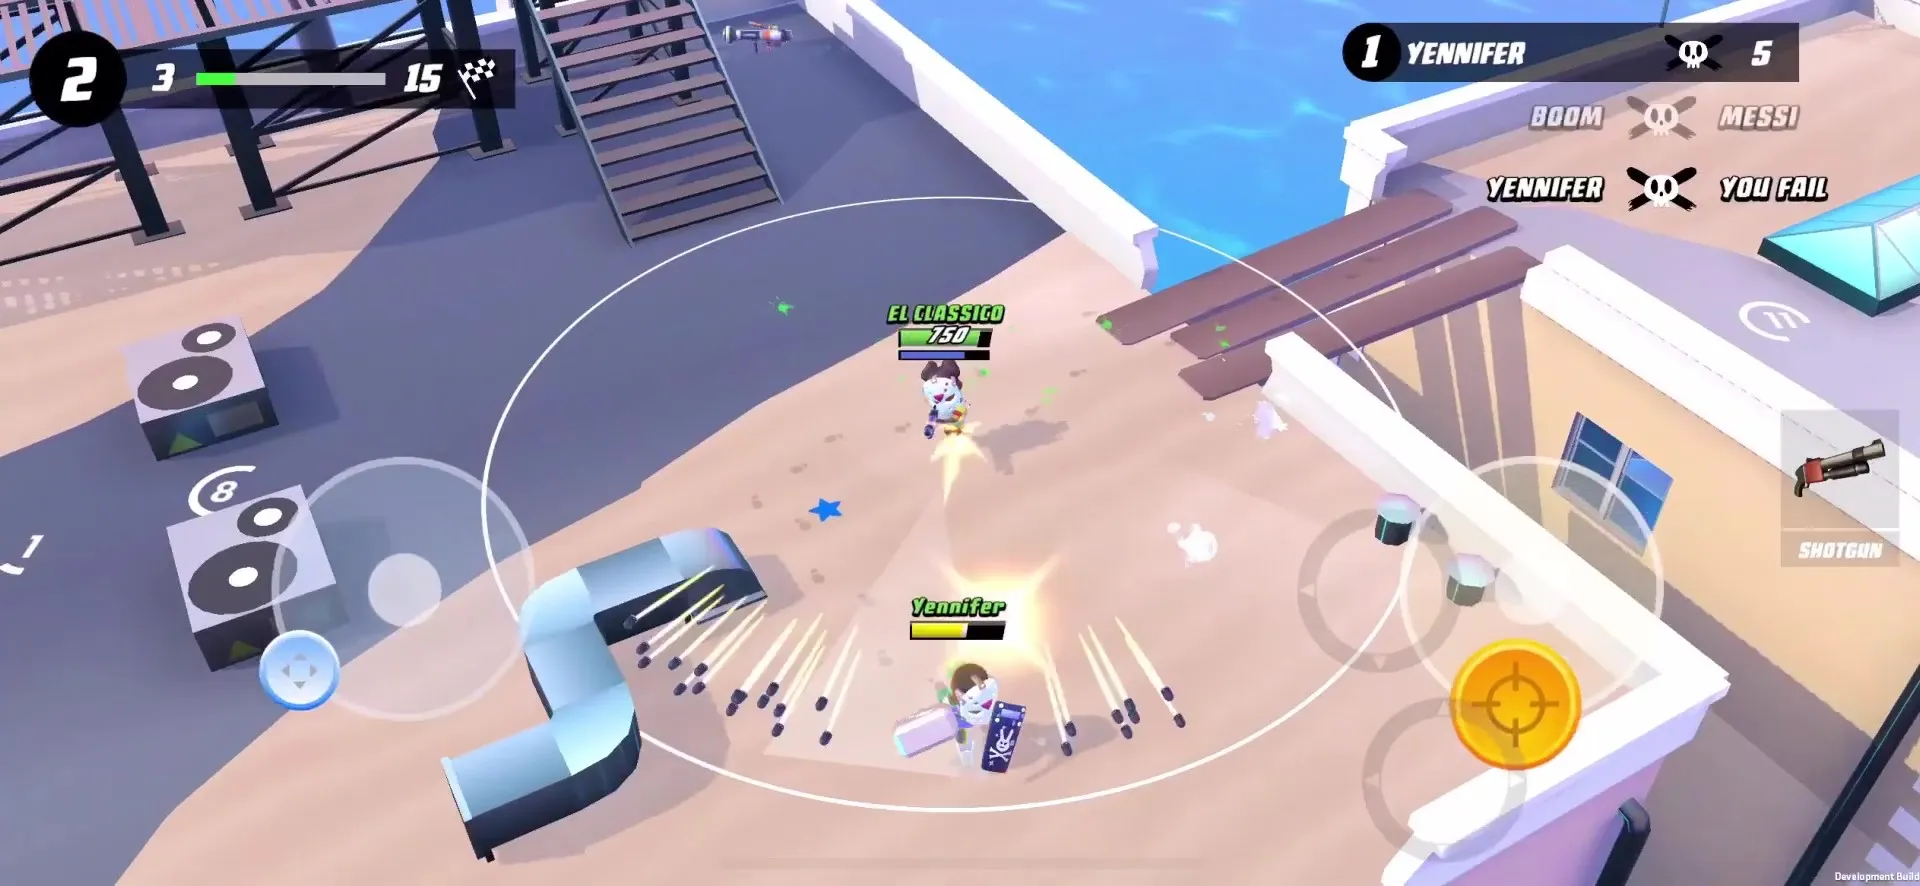 Blast Royale game screen shows a character chasing another in an attempt to defeat them. The top left shows the number of kills, while the right shows the weapon.